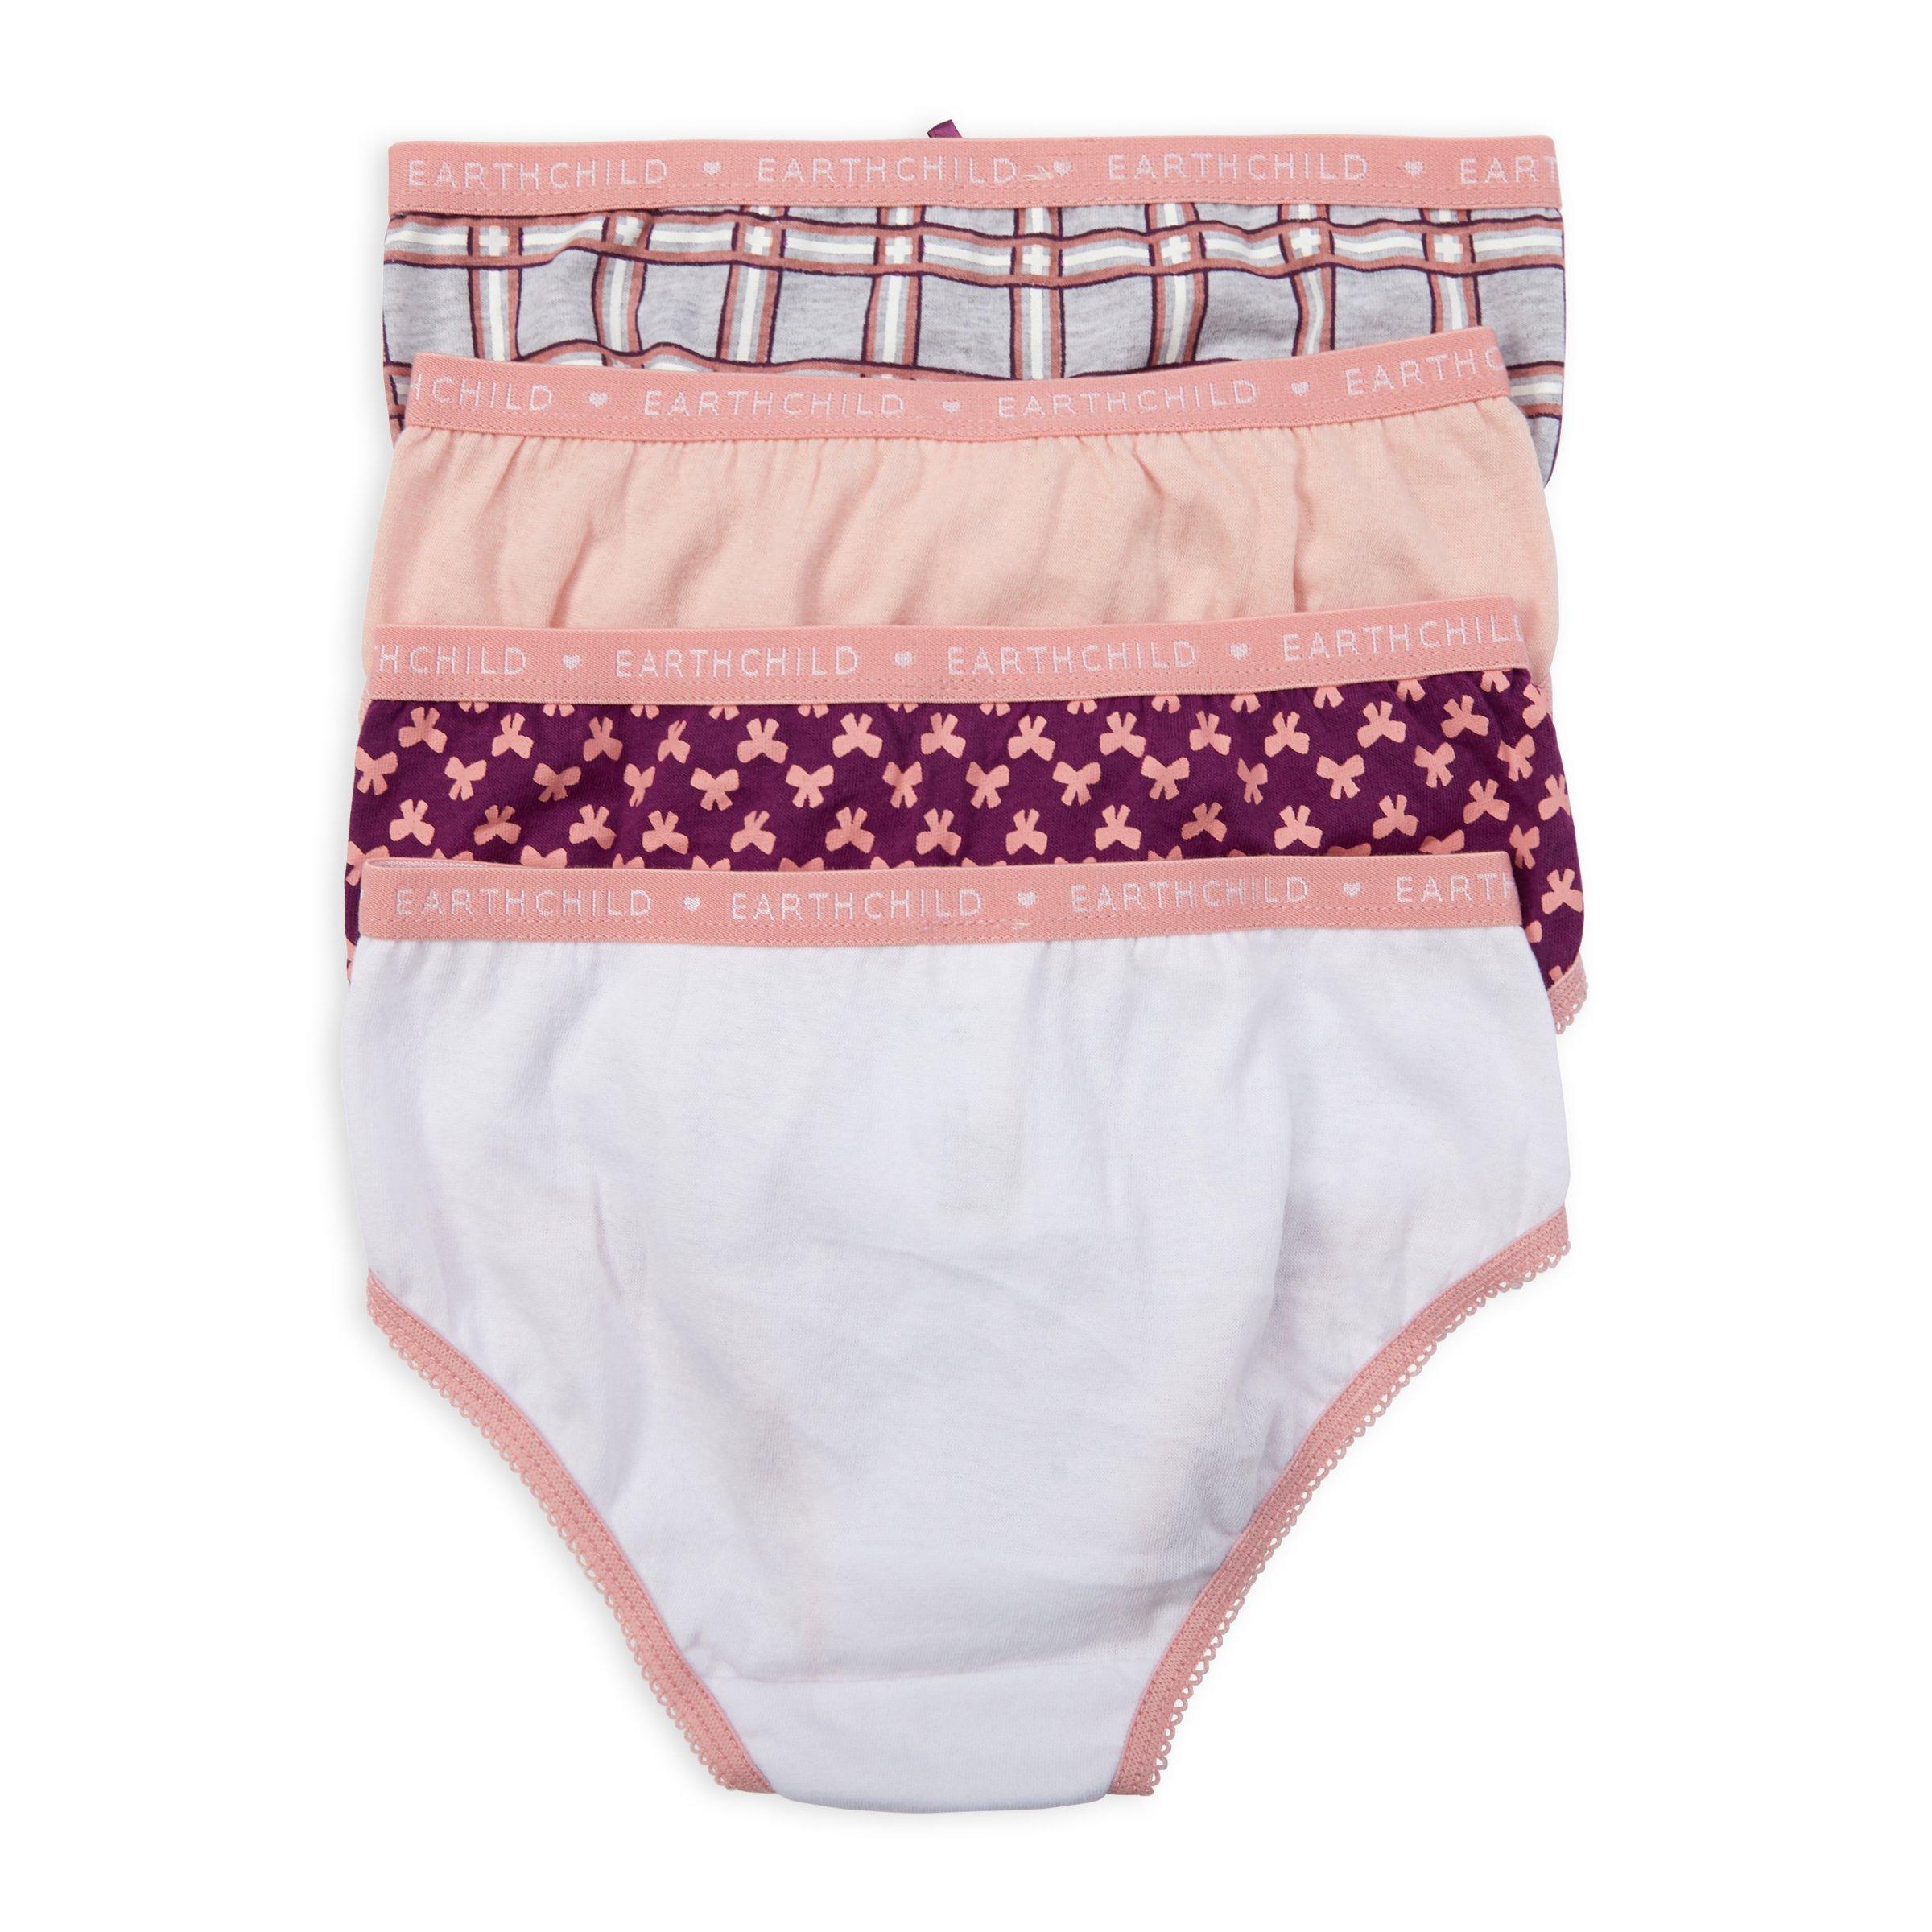 Underwear & Panties in the size 9-10 years for Girls on sale